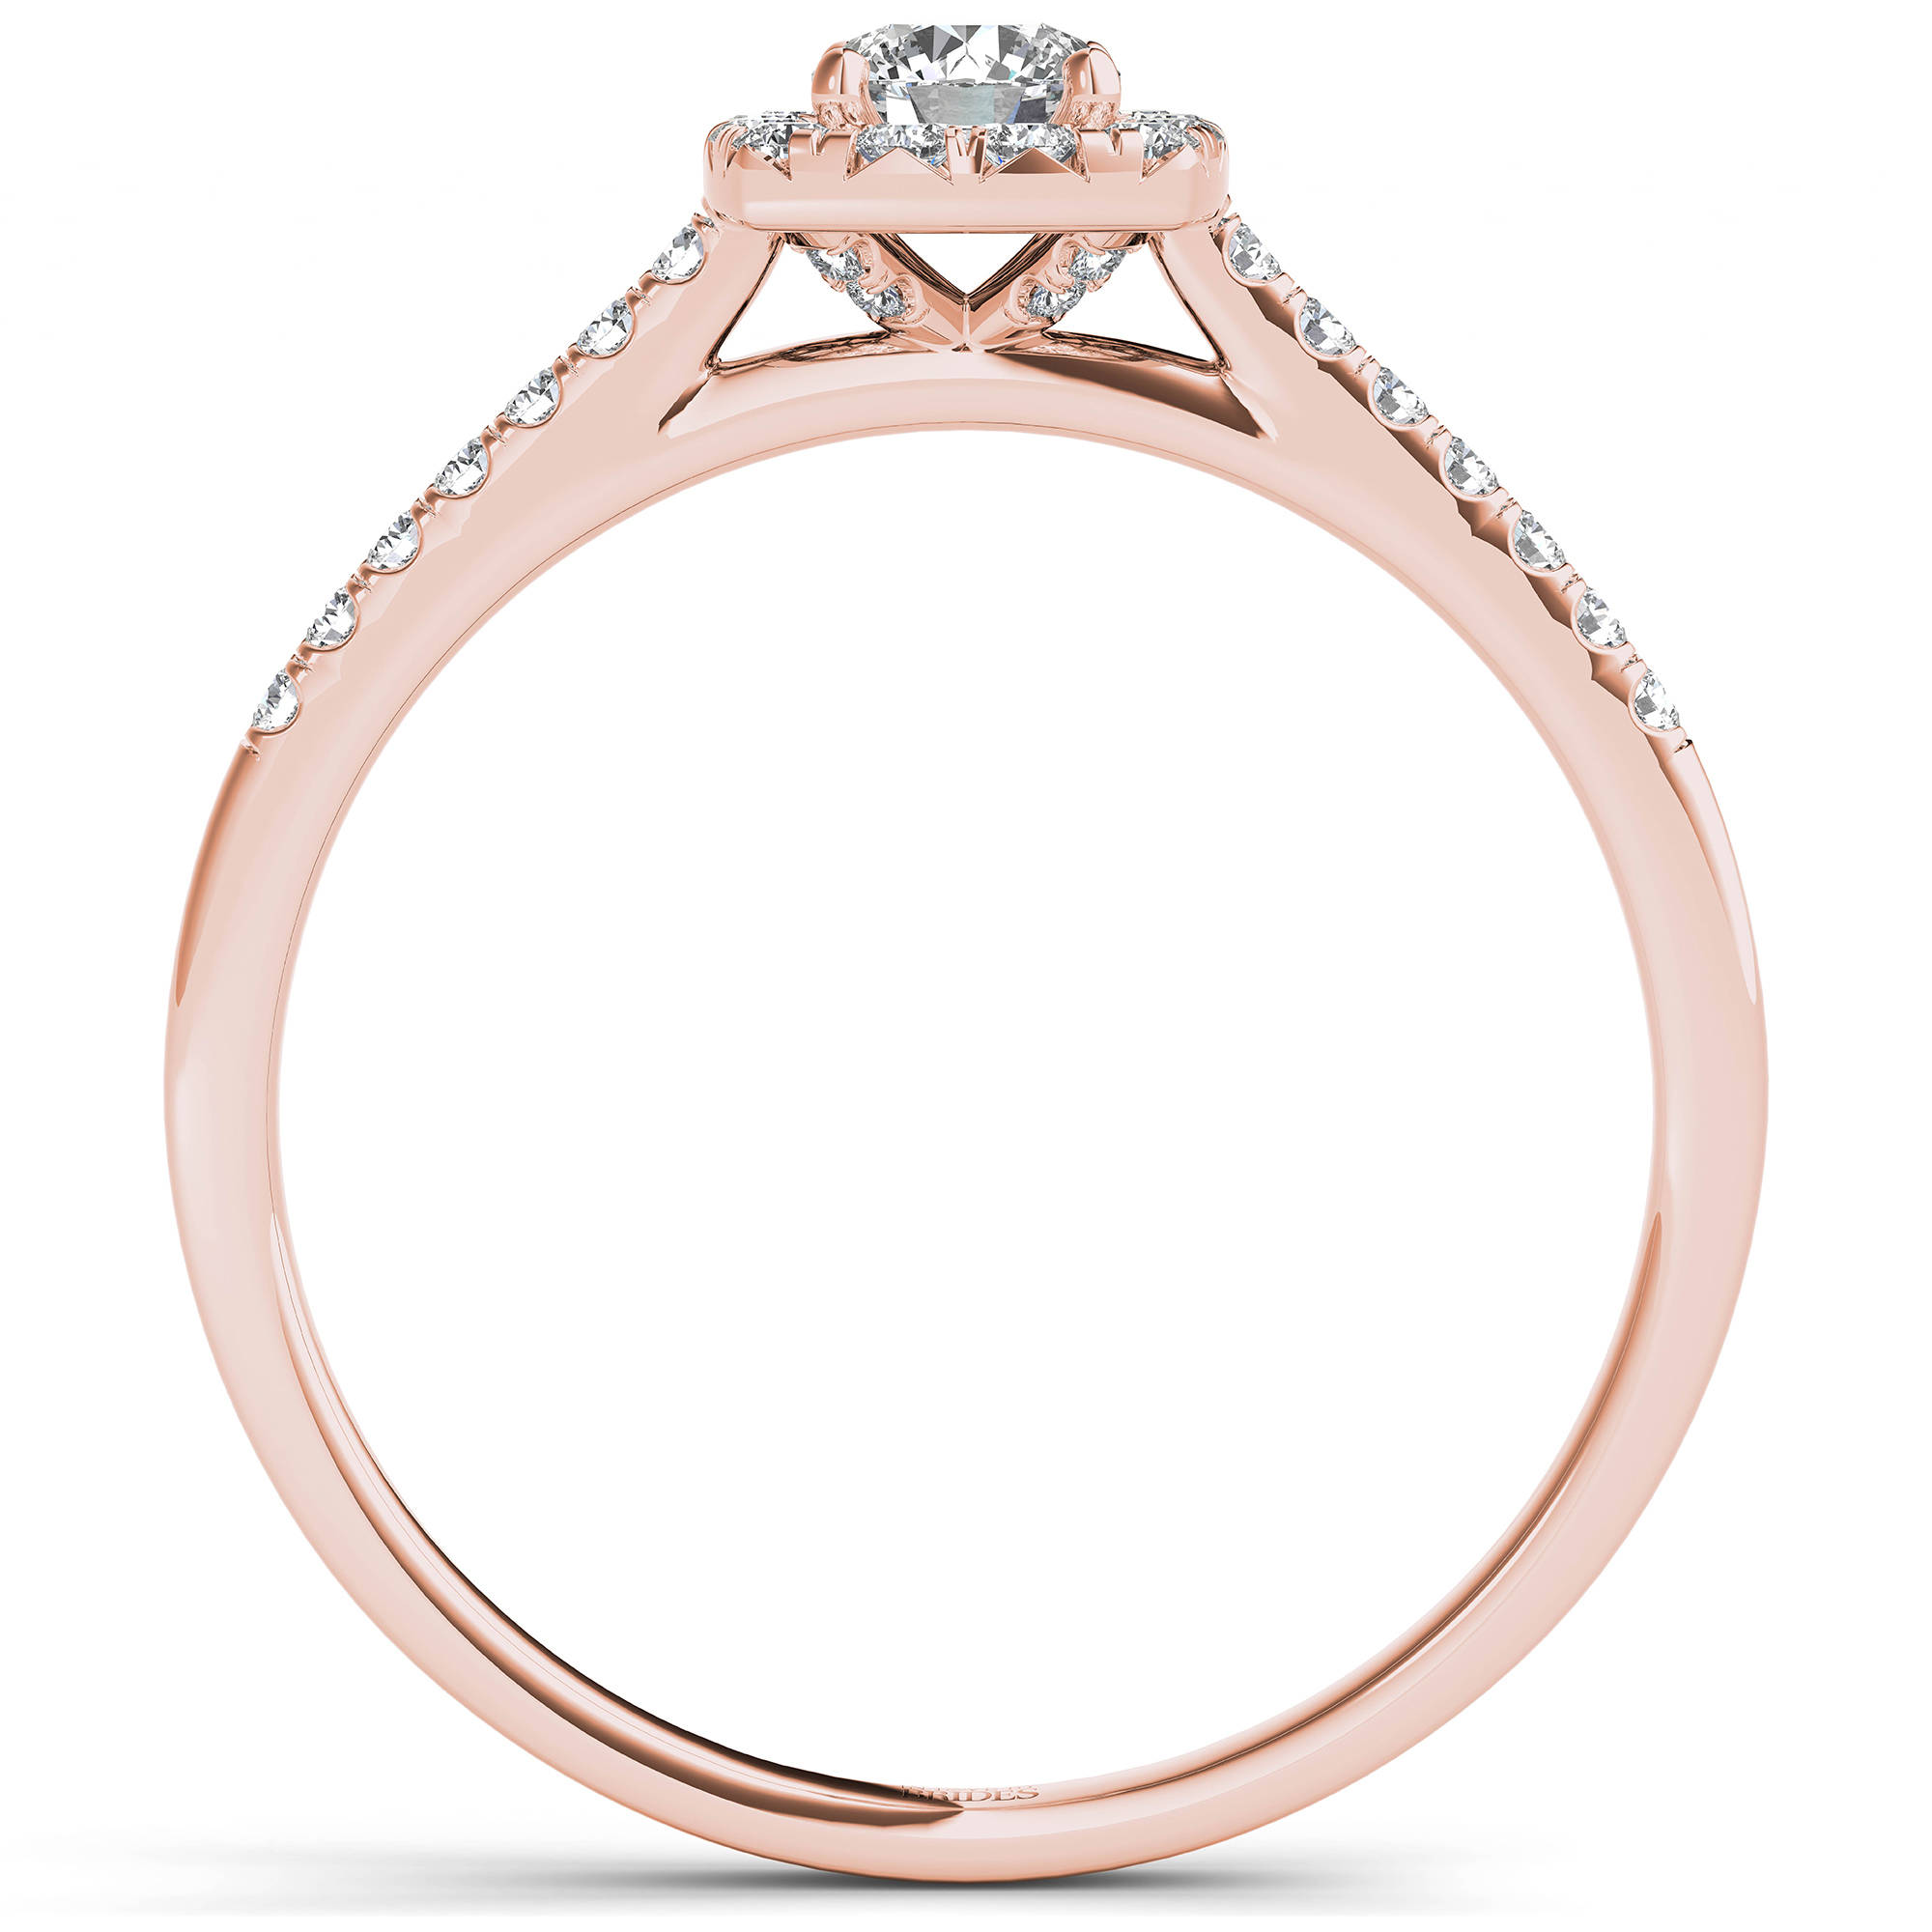 In Love By Brides 3/8ct Tw Diamond Cushi - image 3 of 7